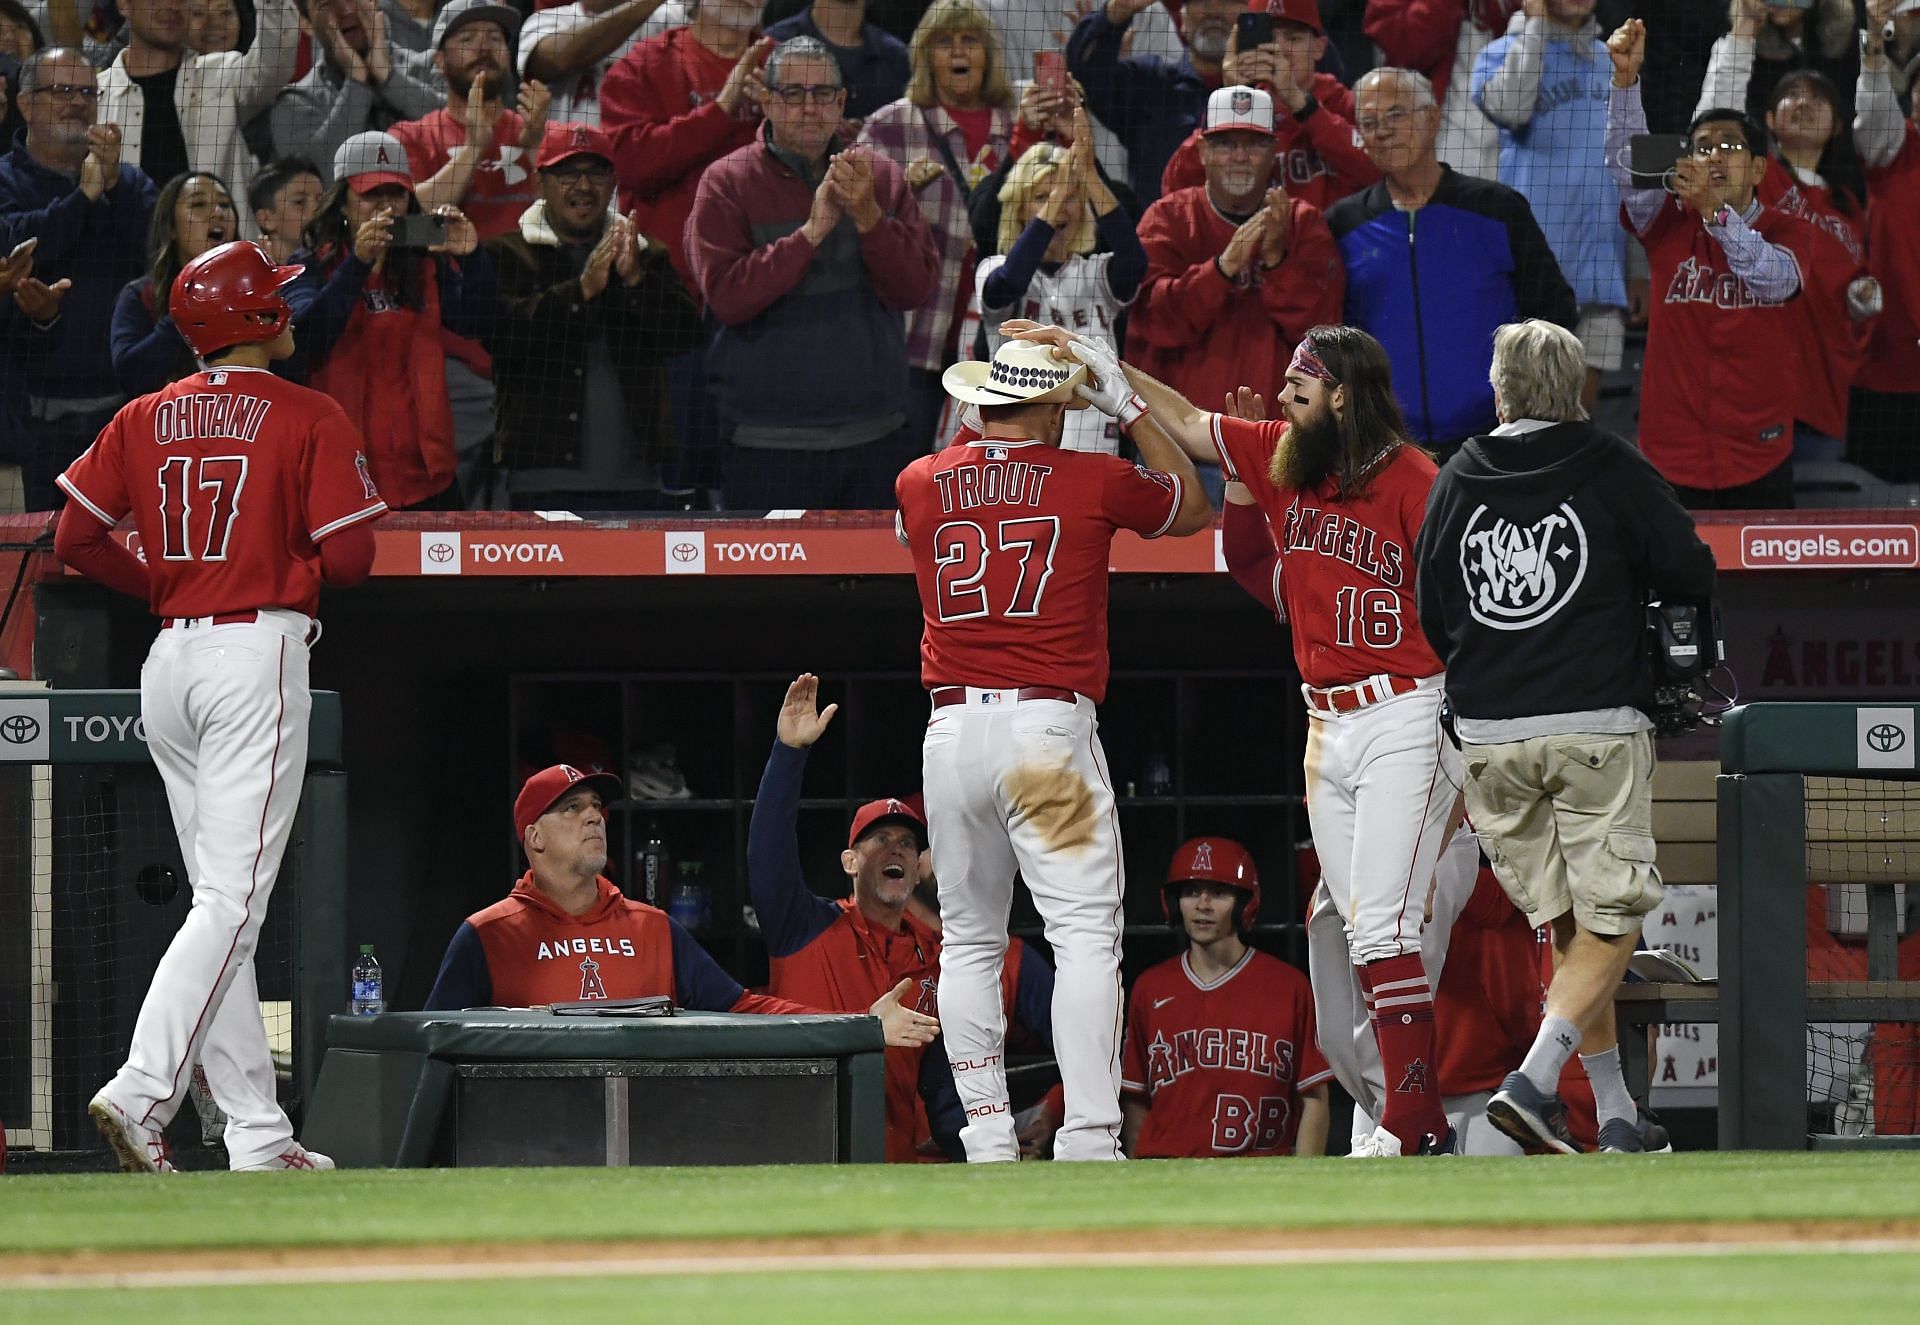 Trout is given the home run hat during a Los Angeles Angels v Toronto Blue Jays game.